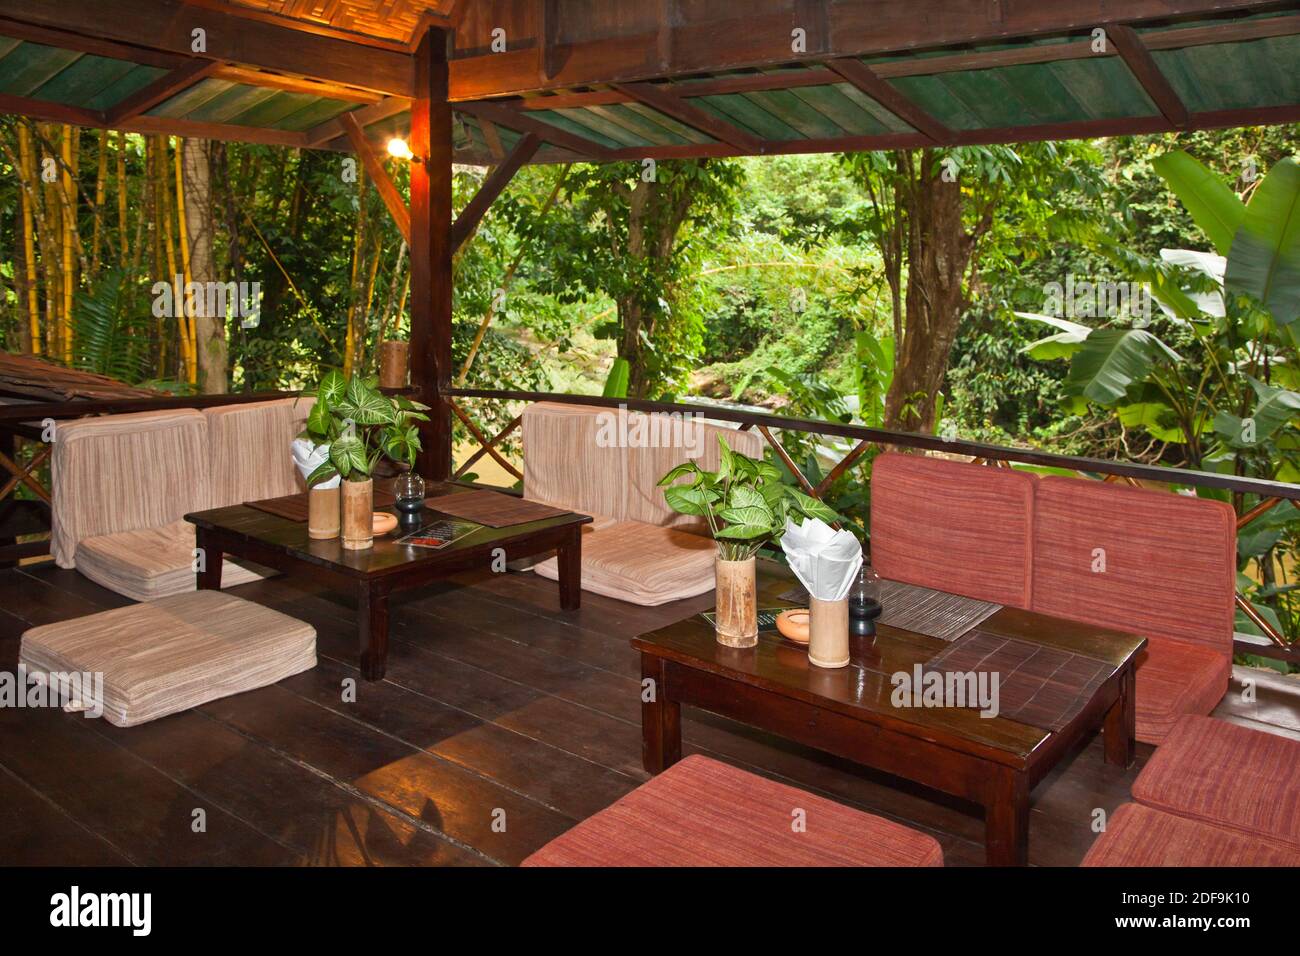 The Bar at OUR JUNGLE HOUSE a lodge in the rainforest near KHAO SOK NATIONAL PARK - SURATHANI PROVENCE, THAILAND Stock Photo